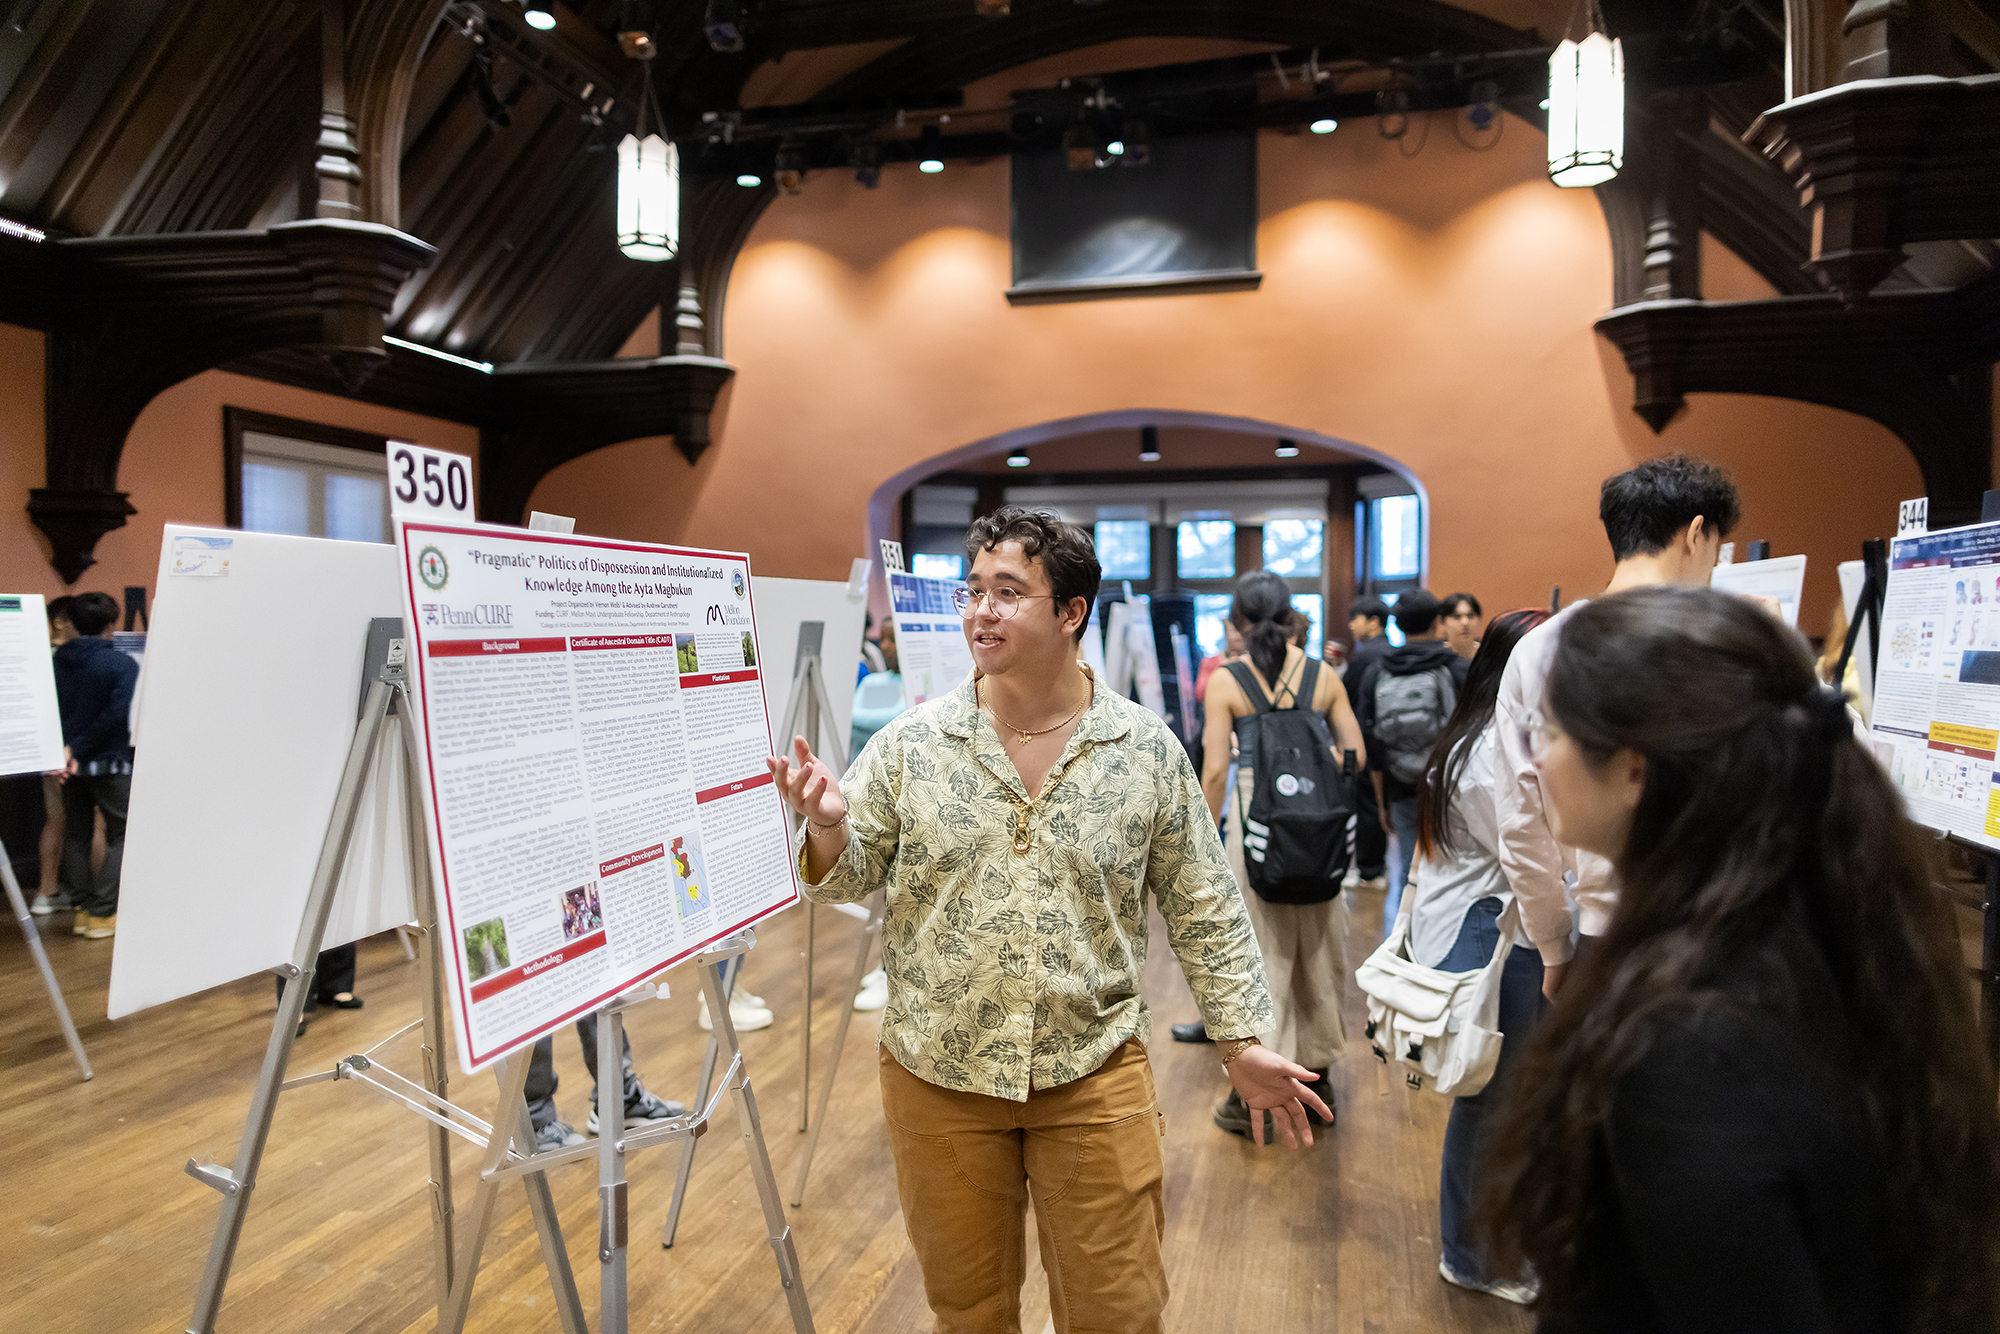 A student discusses their poster with others at the CURF poster expo.